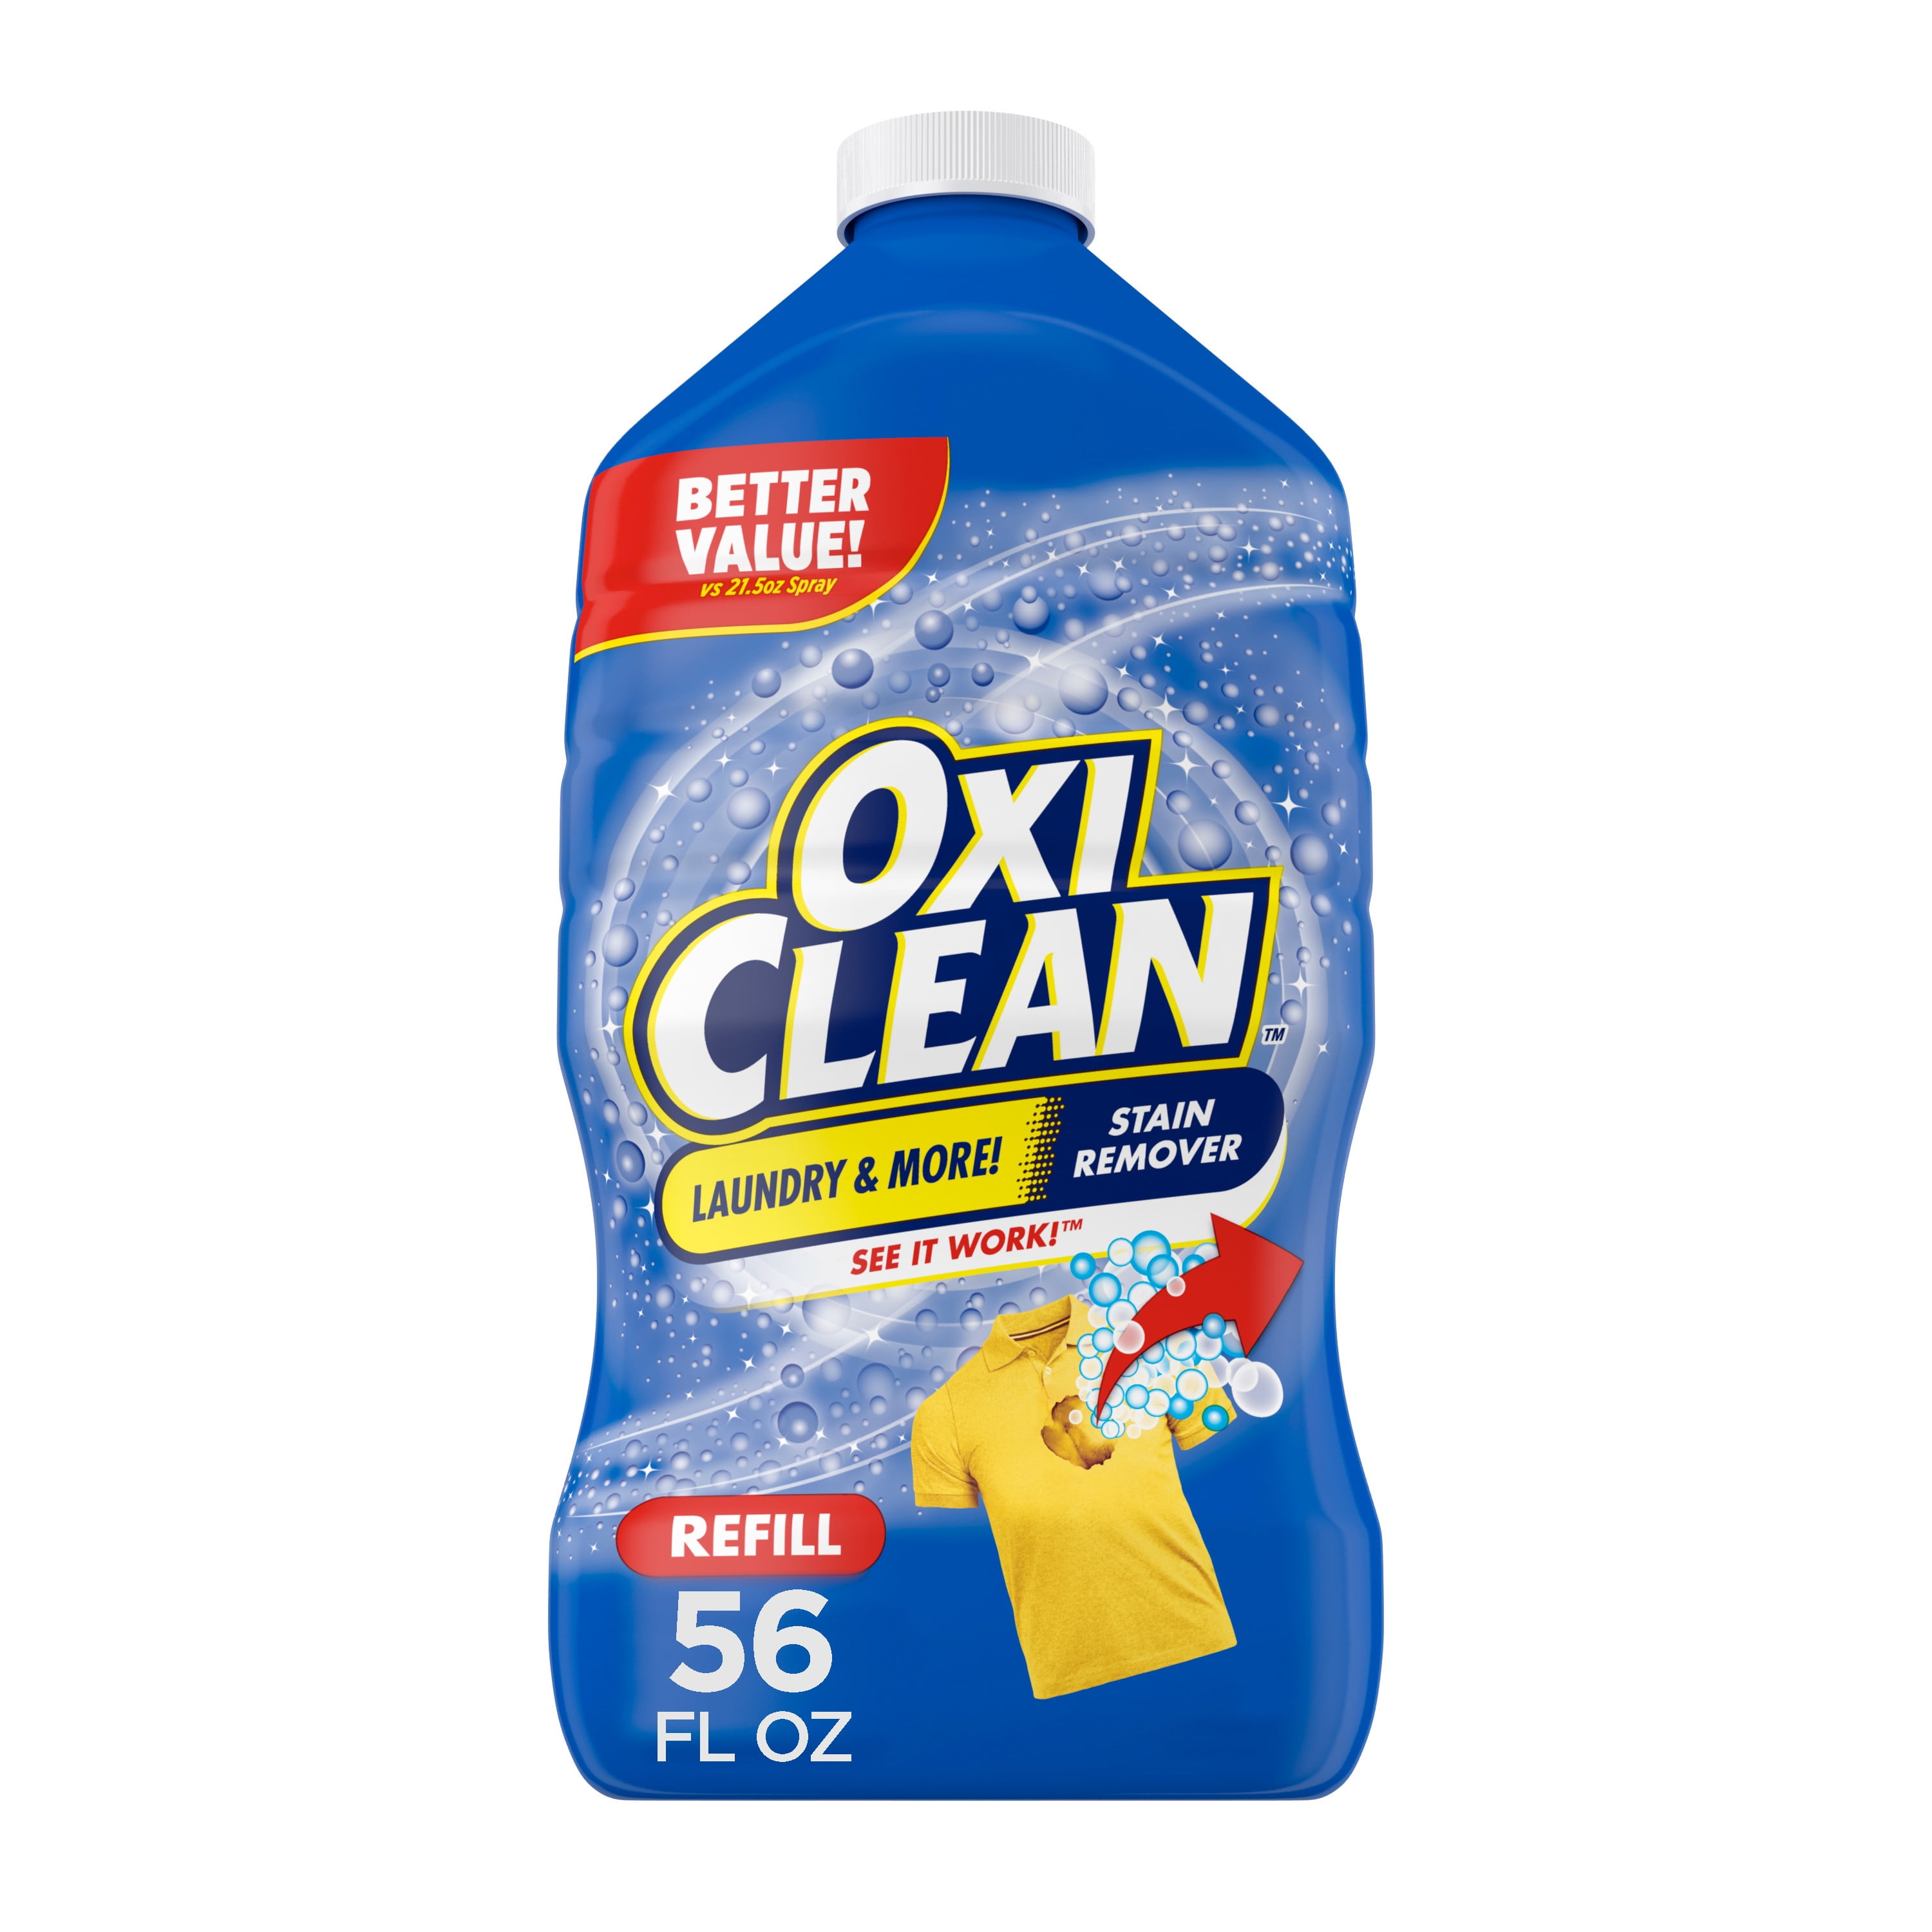 OxiClean White Revive Laundry Stain Remover, 40.5 fl oz